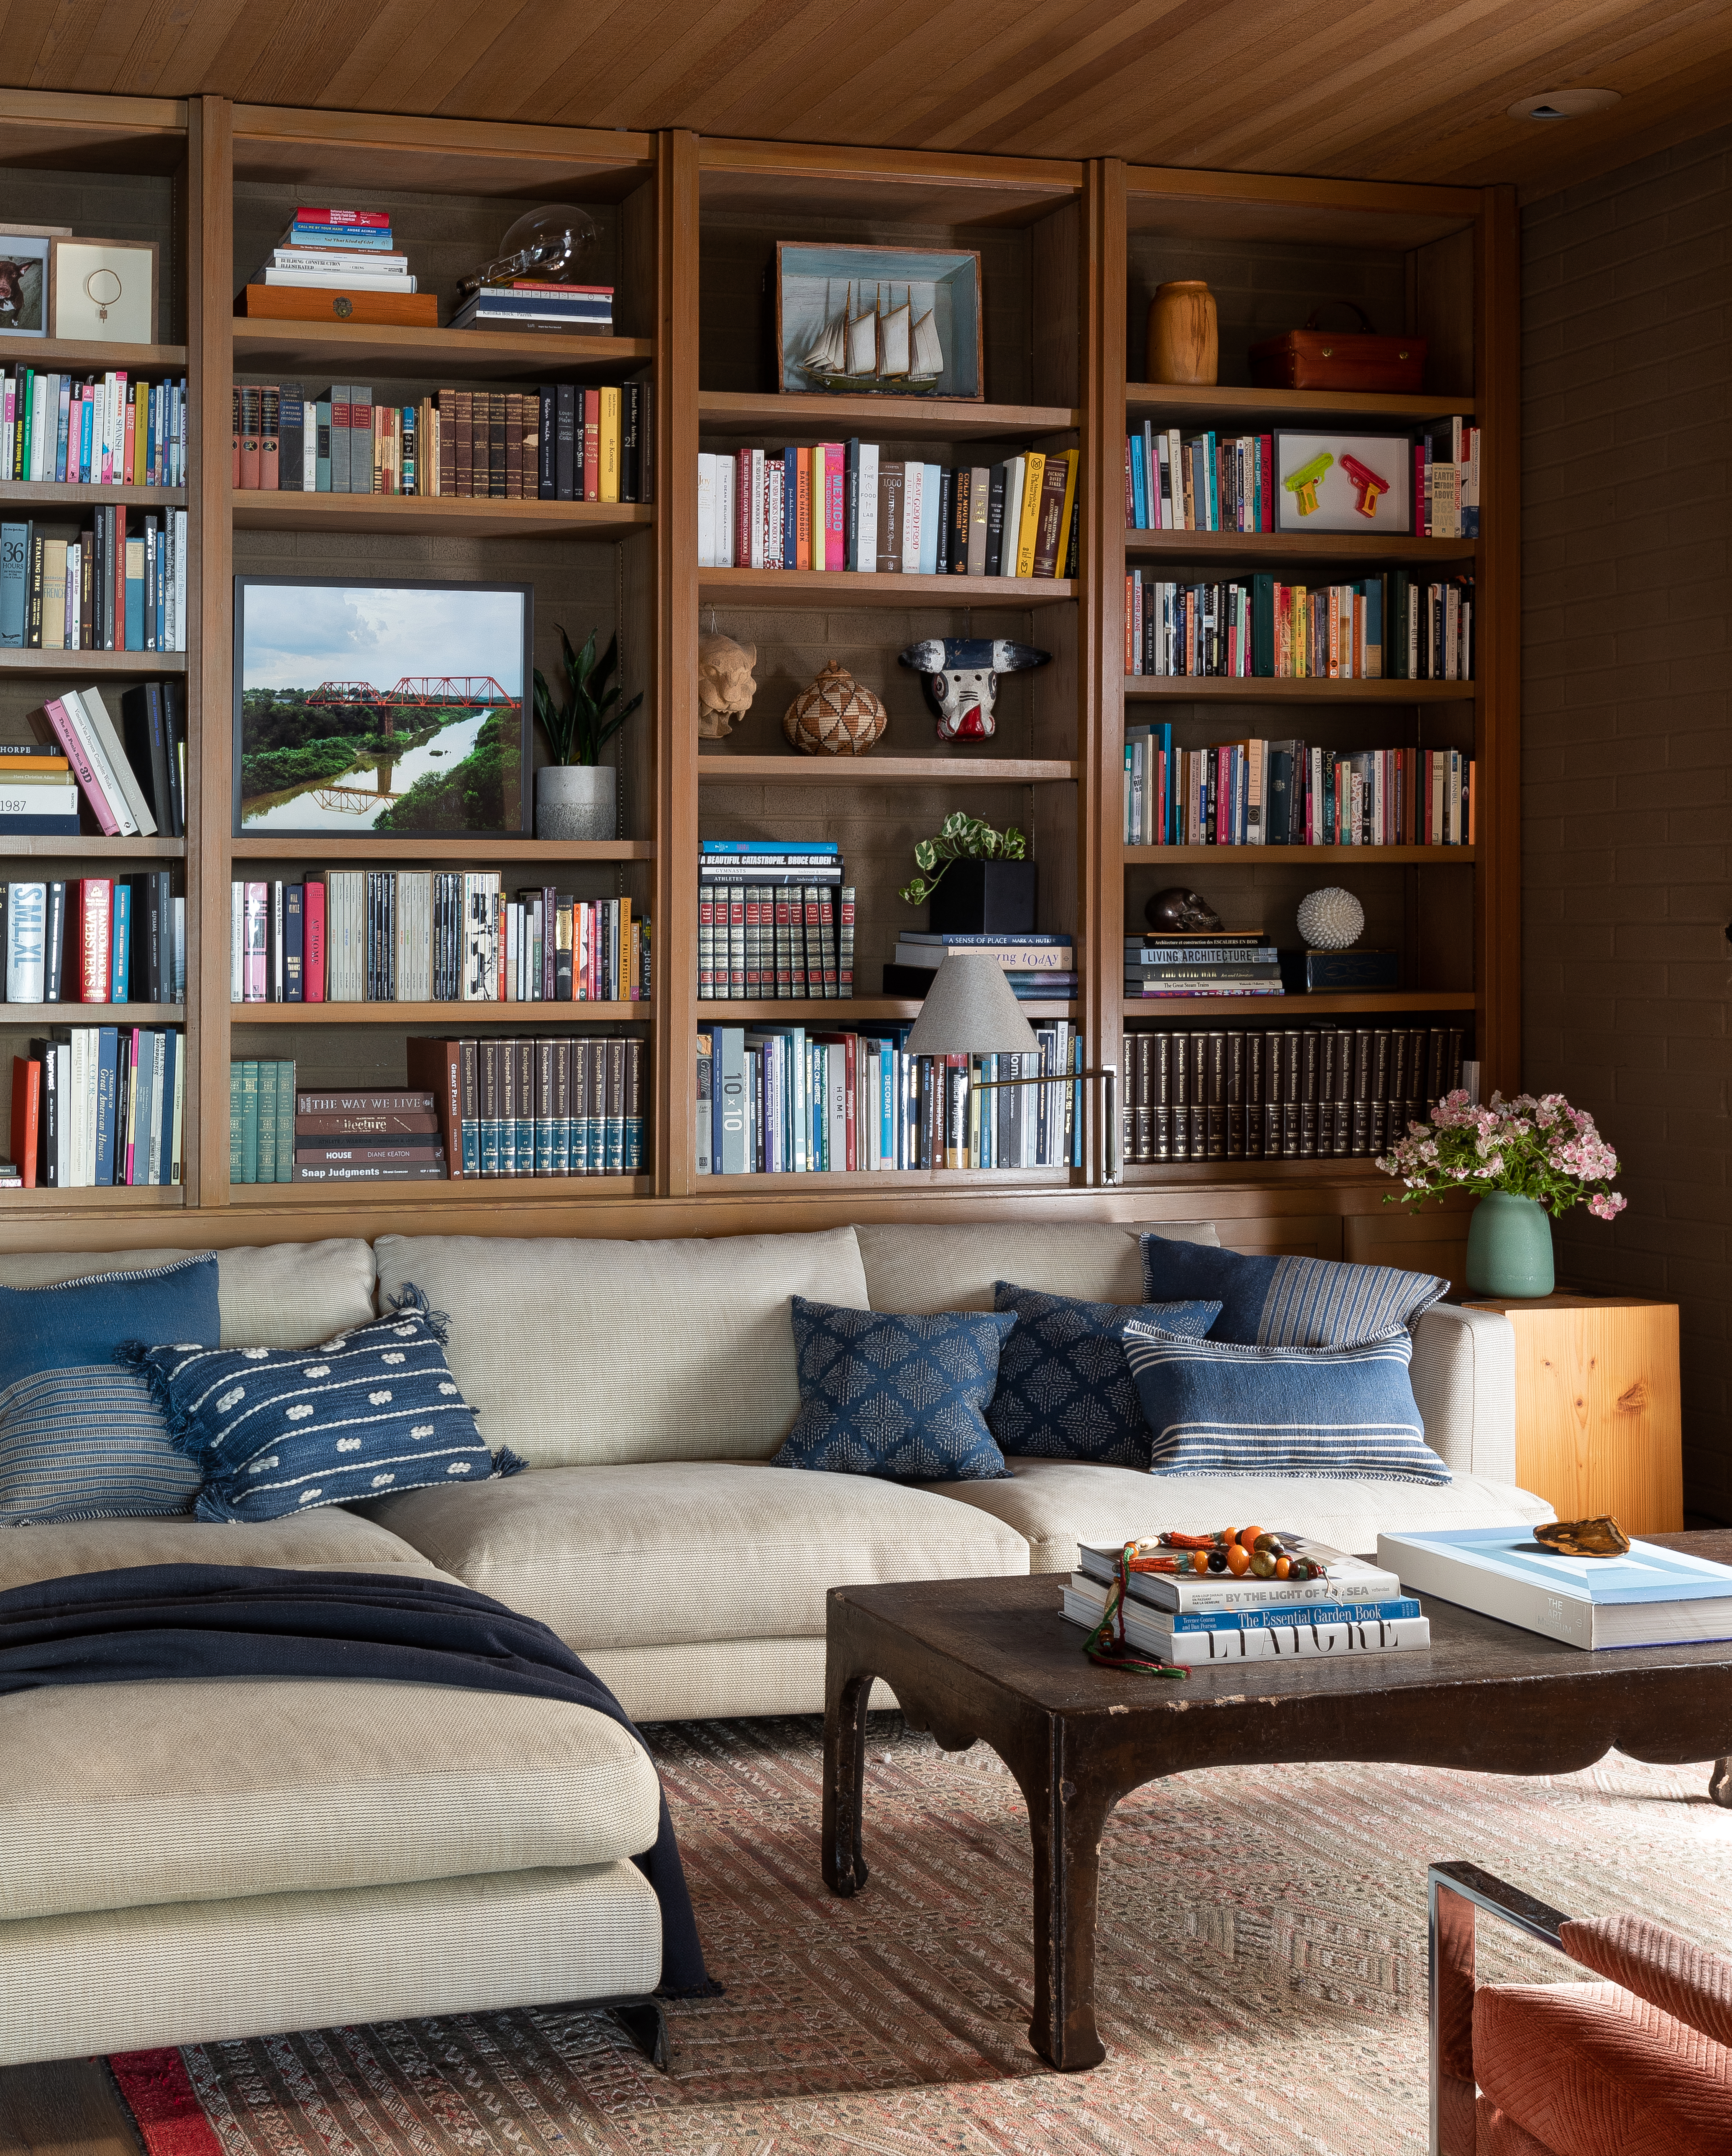 The library/office is cozy and practical with built-in shelving and storage. A collection of books and artifacts lines the entire wall, reflecting the owner's travels and studies.